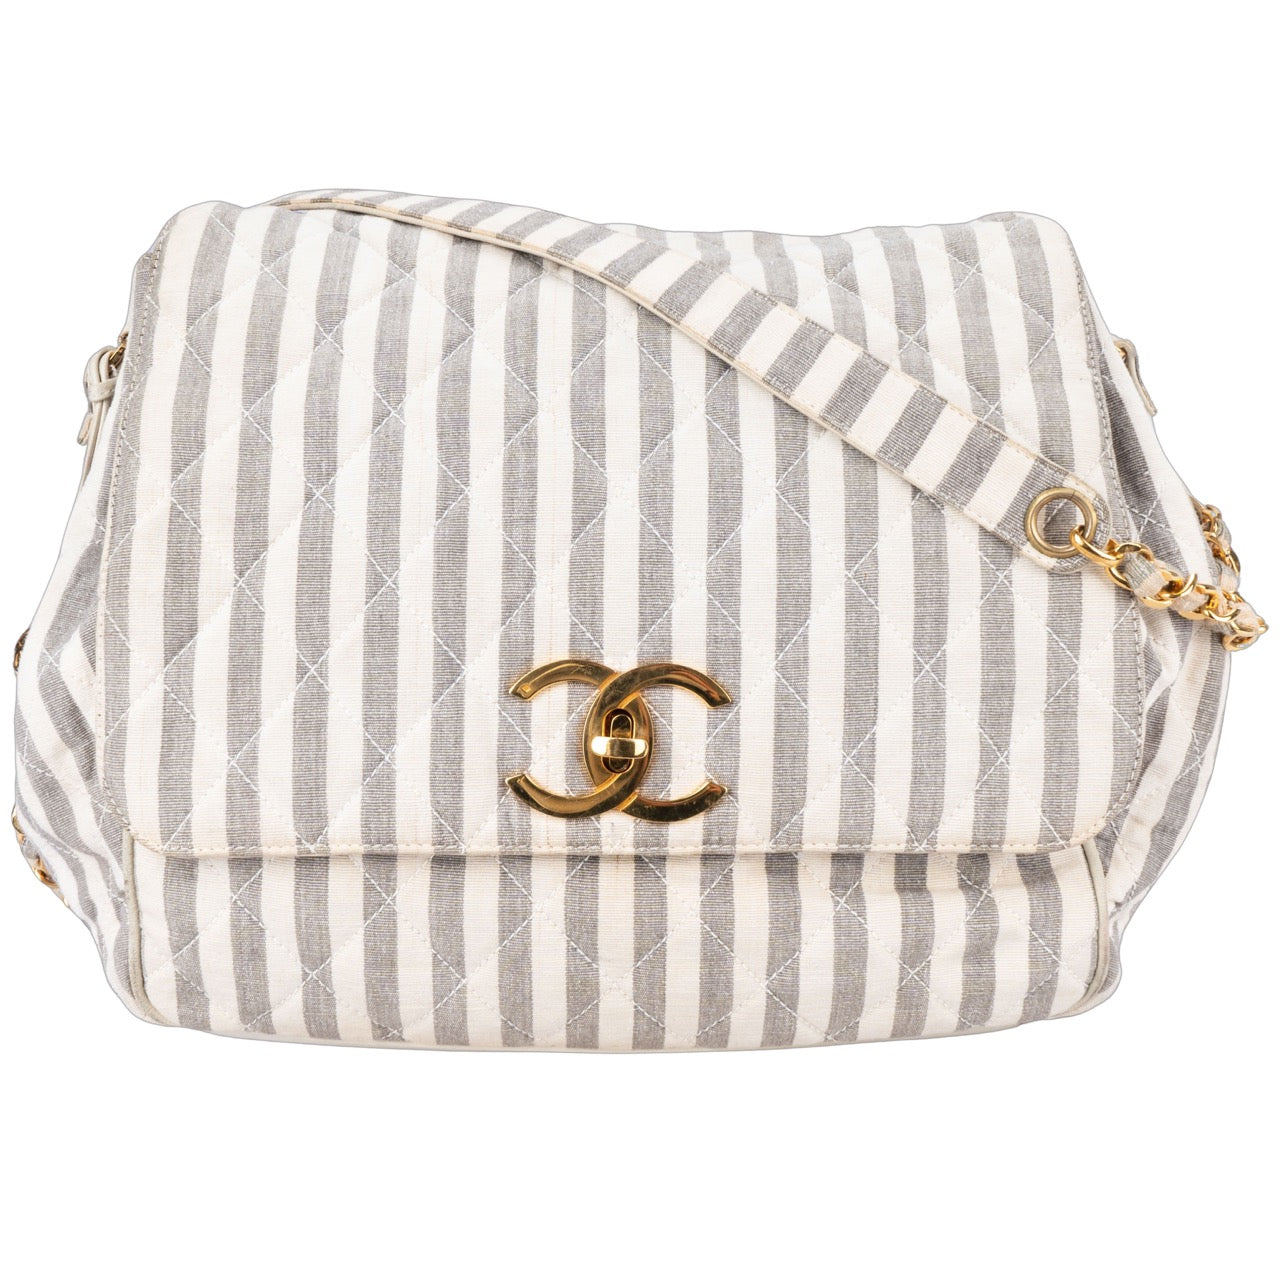 Chanel Quilted Cotton Crossbody Bag